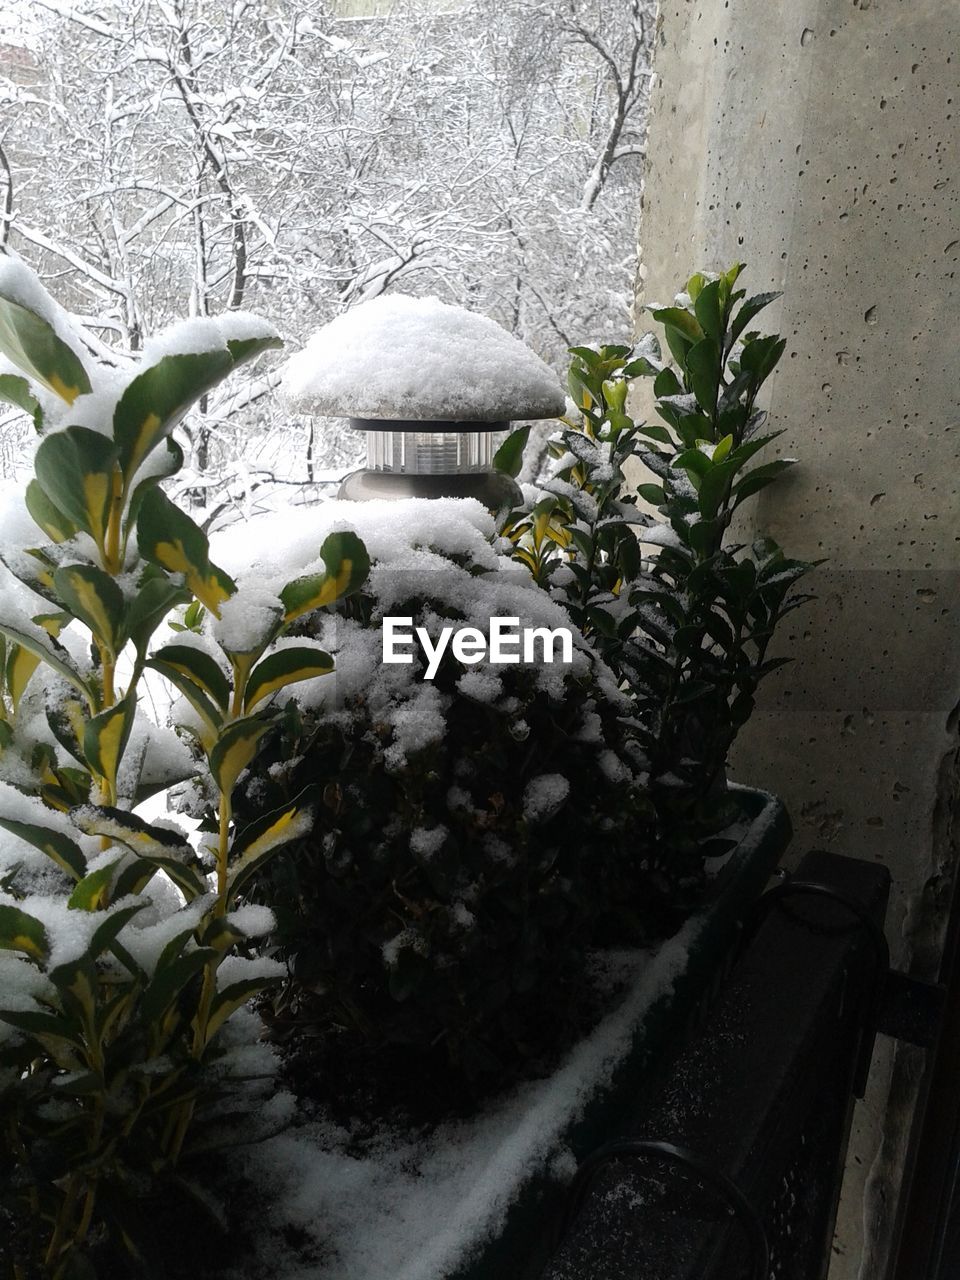 CLOSE-UP OF SNOW ON PLANTS AGAINST TREES